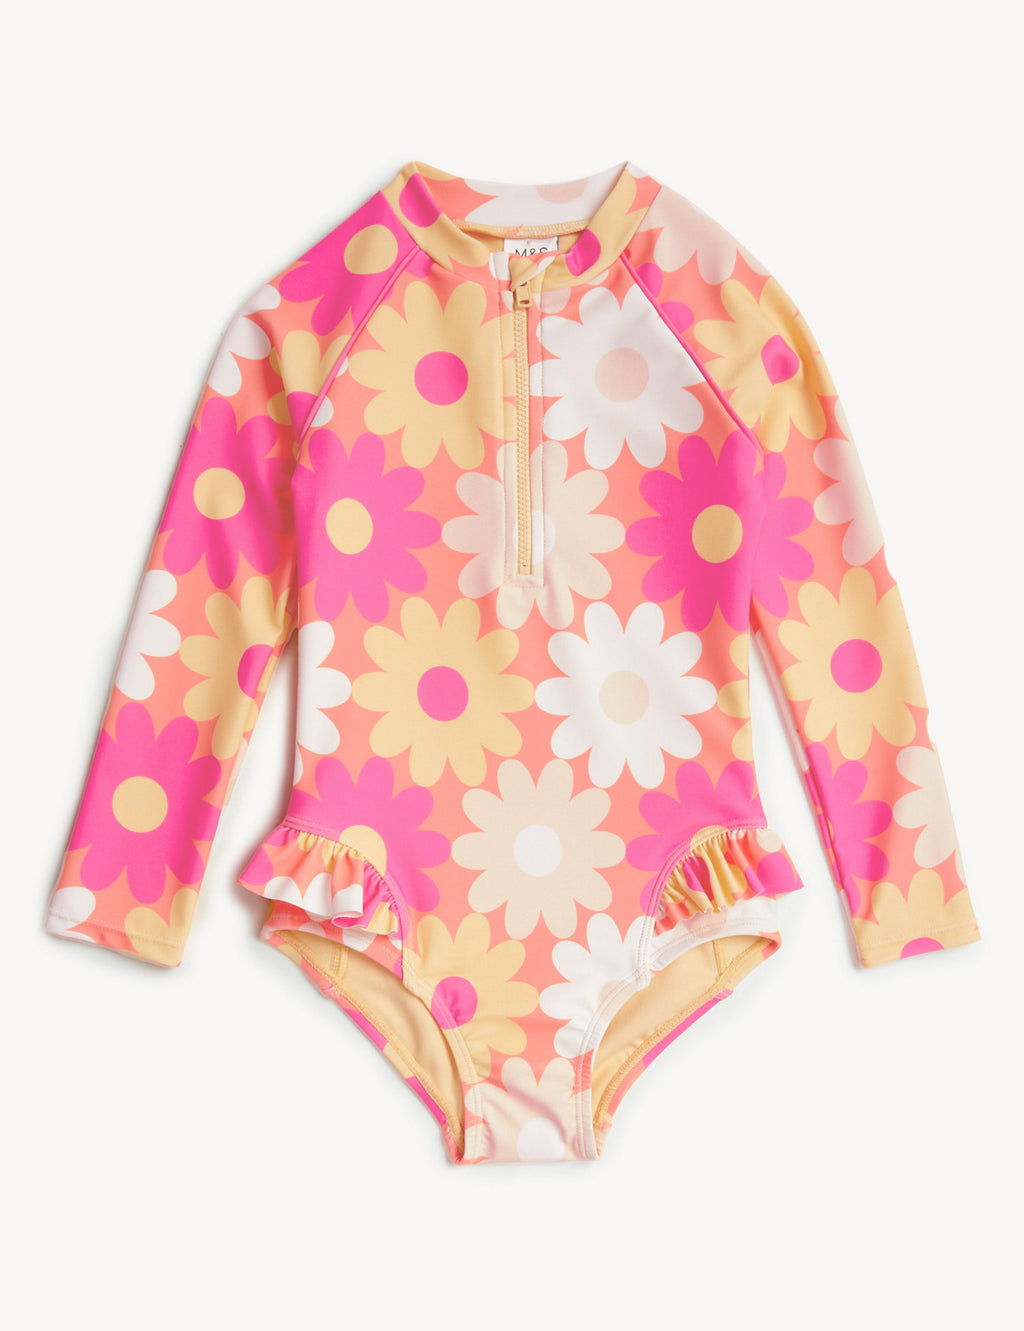 The Beach Company India - Buy branded girls swimwear online - Floral Long Sleeve Swimsuit for young girls - branded swimwear for kids